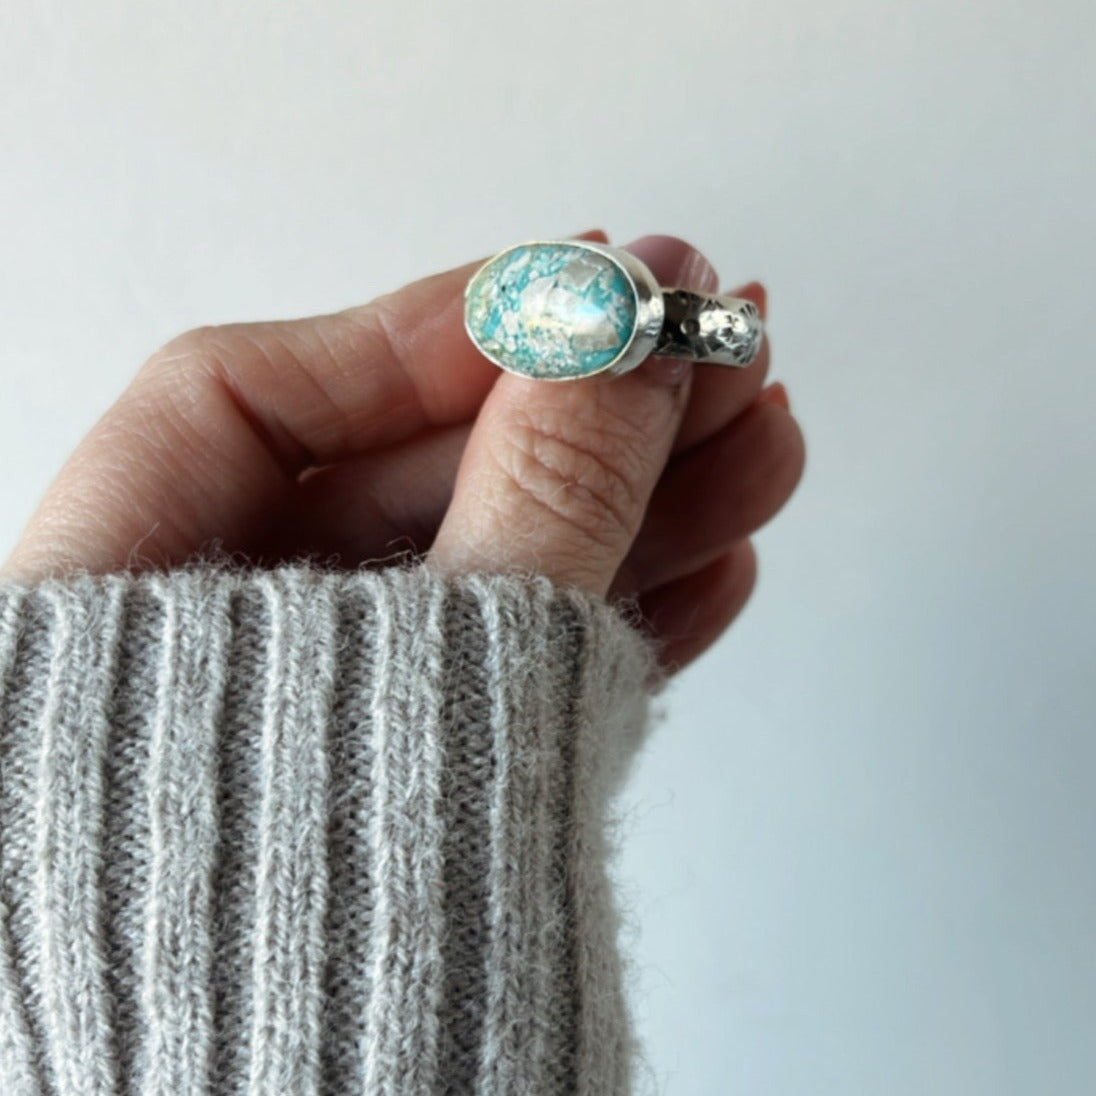 East West Turquoise Ring - Size 8.75 - Desert Sky